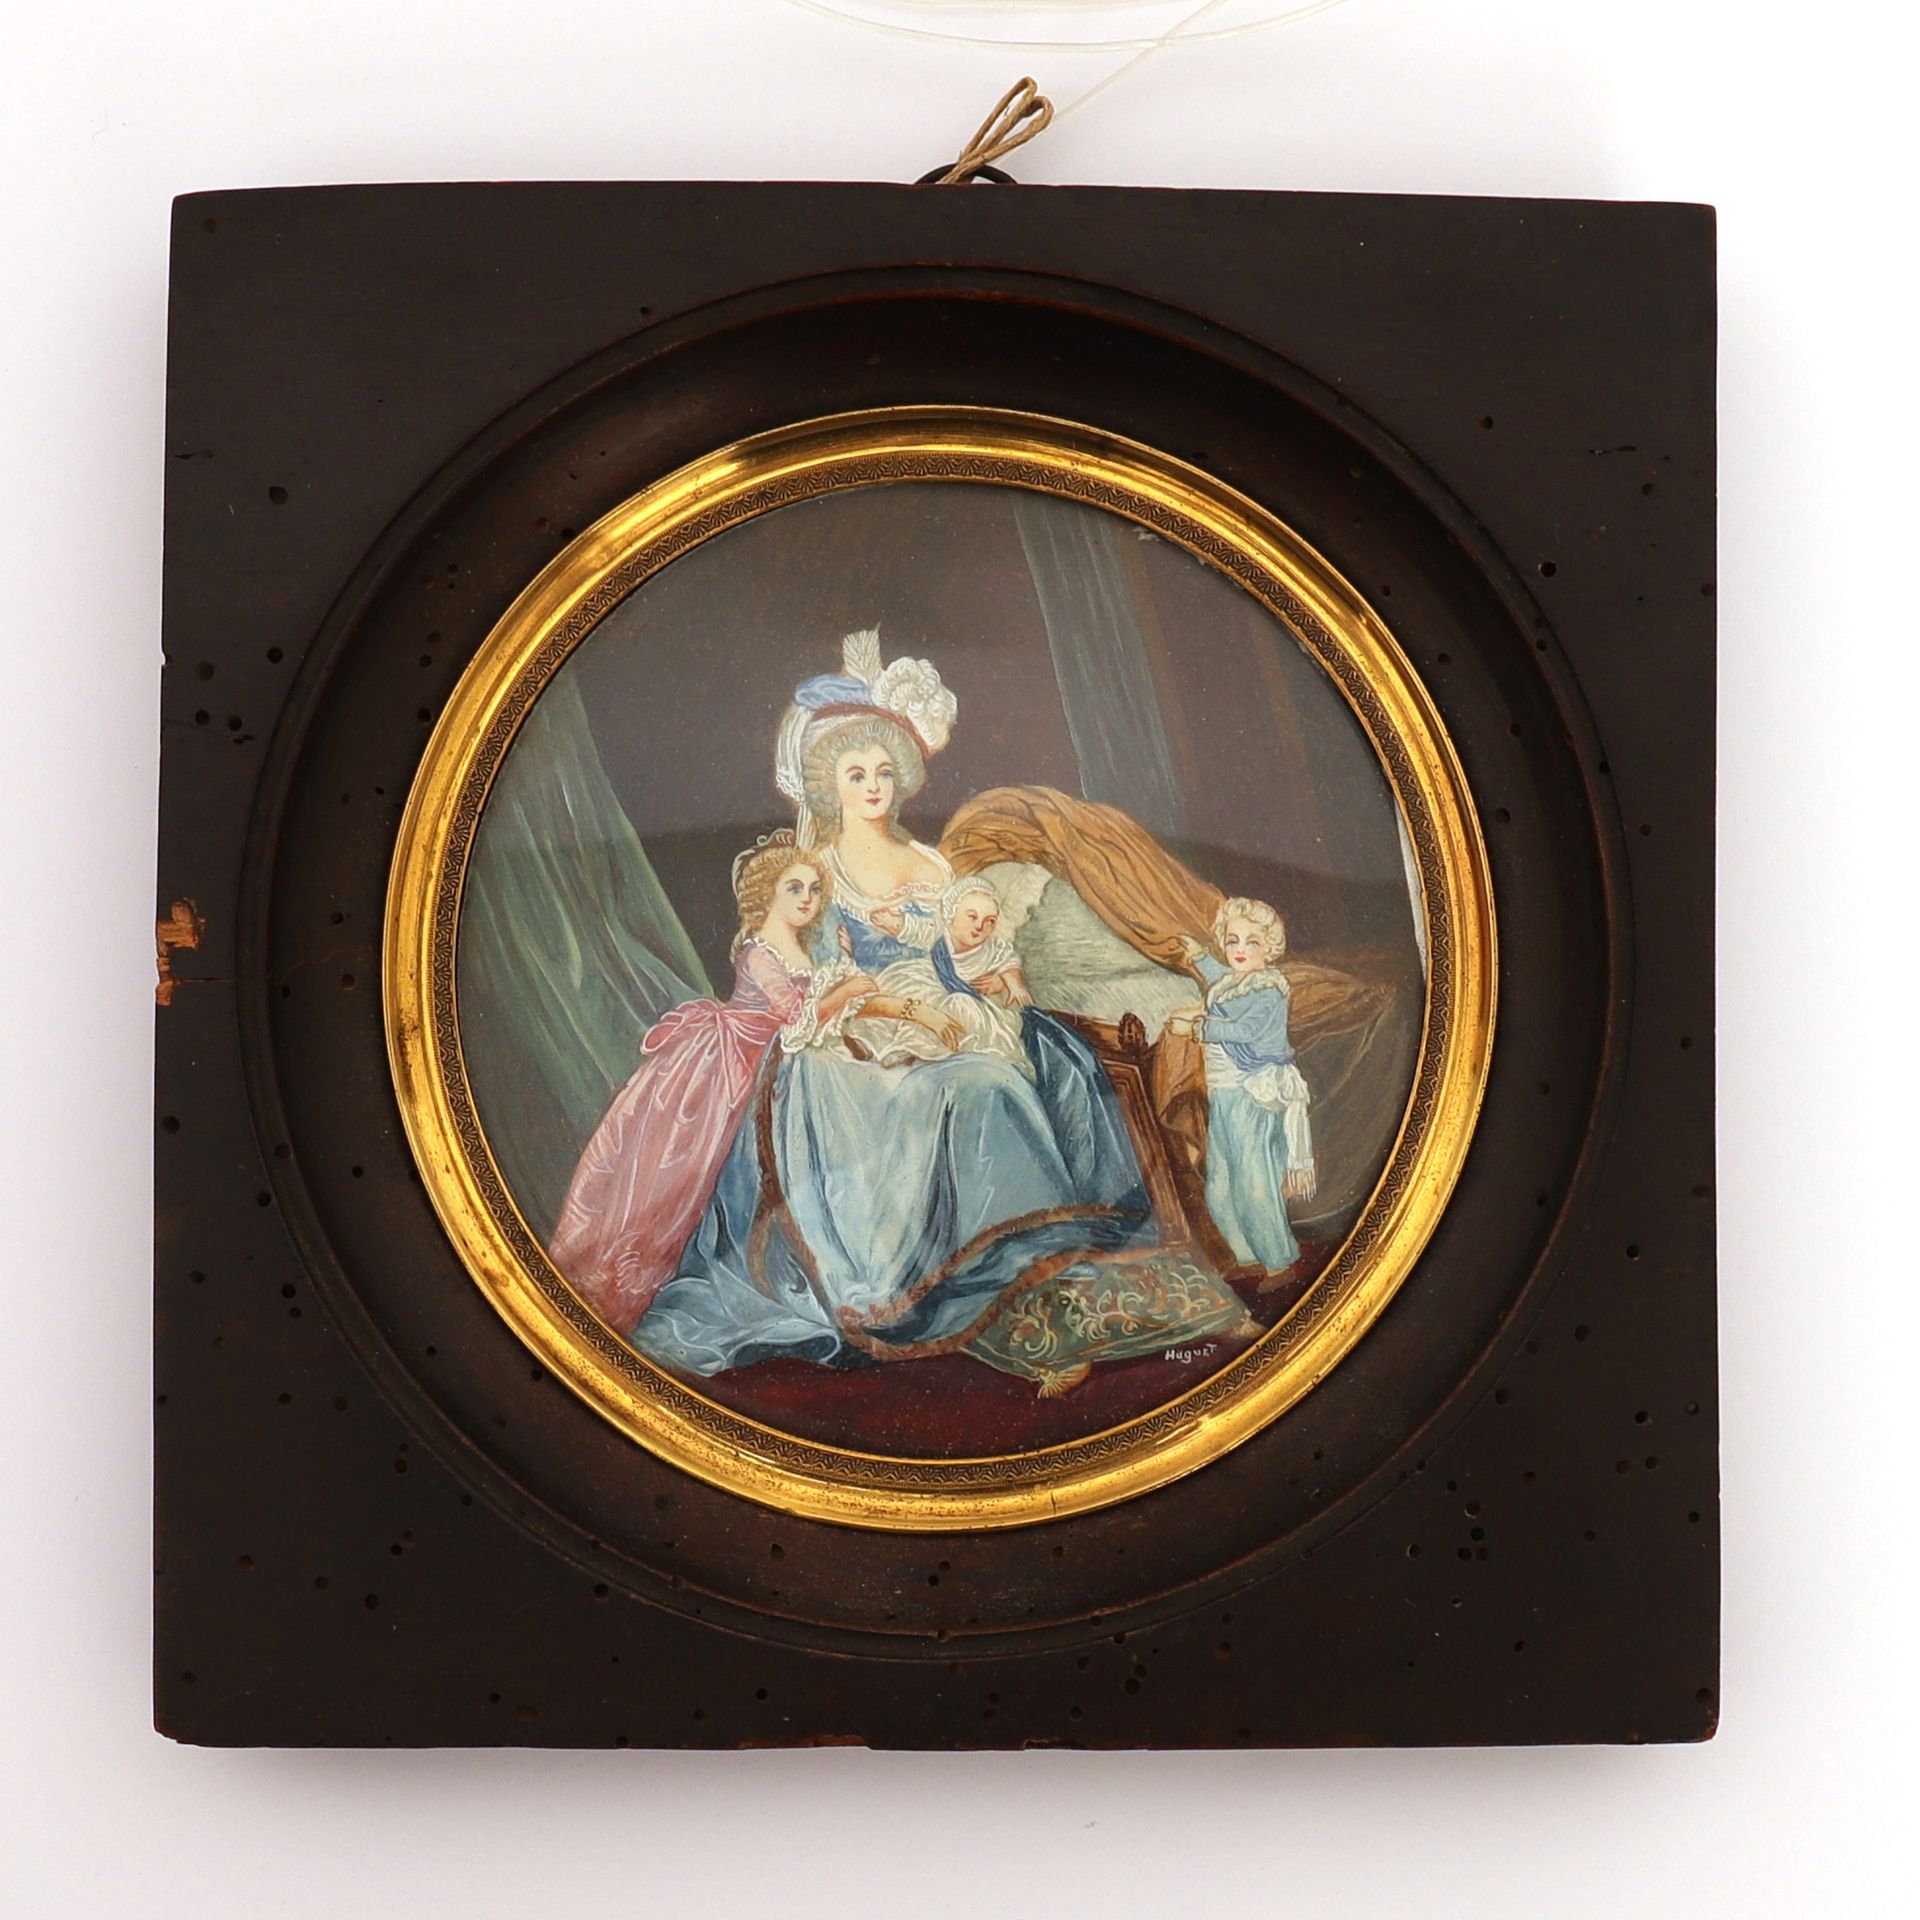 Null MINIATURE "MARIE-ANTOINETTE AND HER CHILDREN" by HUGUET

After the famous p&hellip;